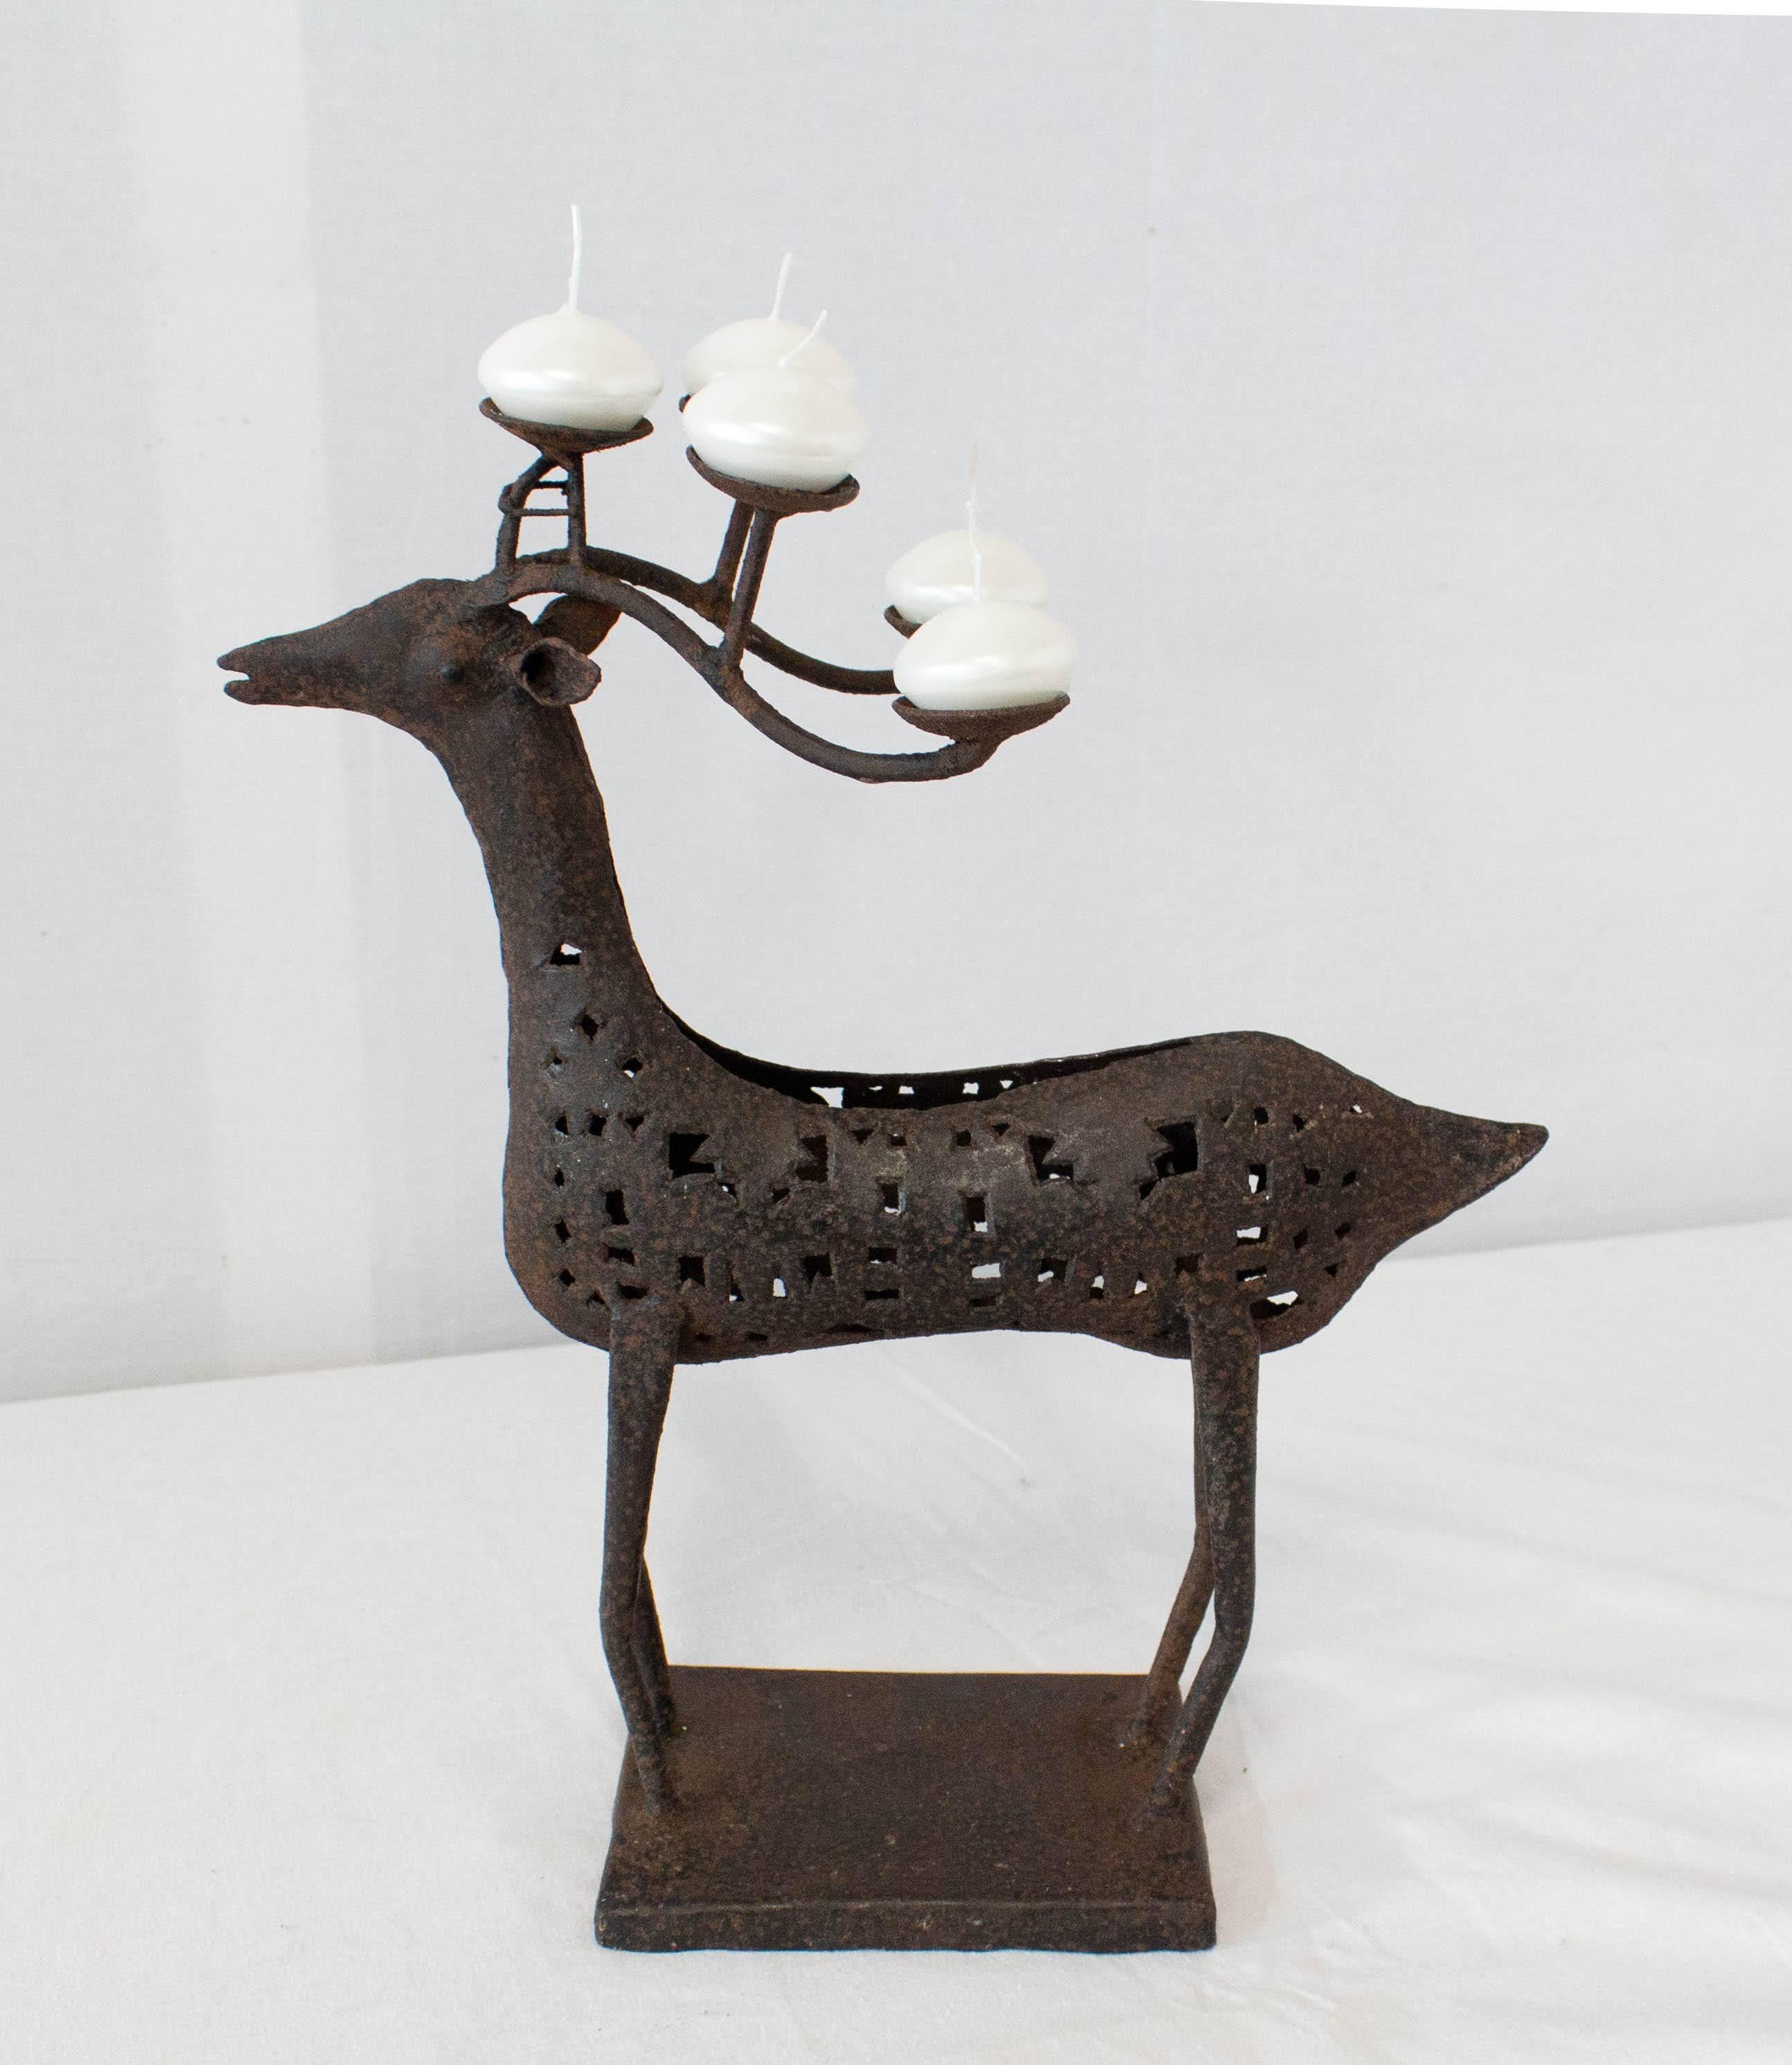 Deer iron candlestick French circa 1960 Christmas decoration
Also ideal for a decoration on hunting or forest
Holds 5 candles of all kinds
Good vintage condition

For shipping:
Measures: 44 x 38 x 13 cm 1.4kg.
   